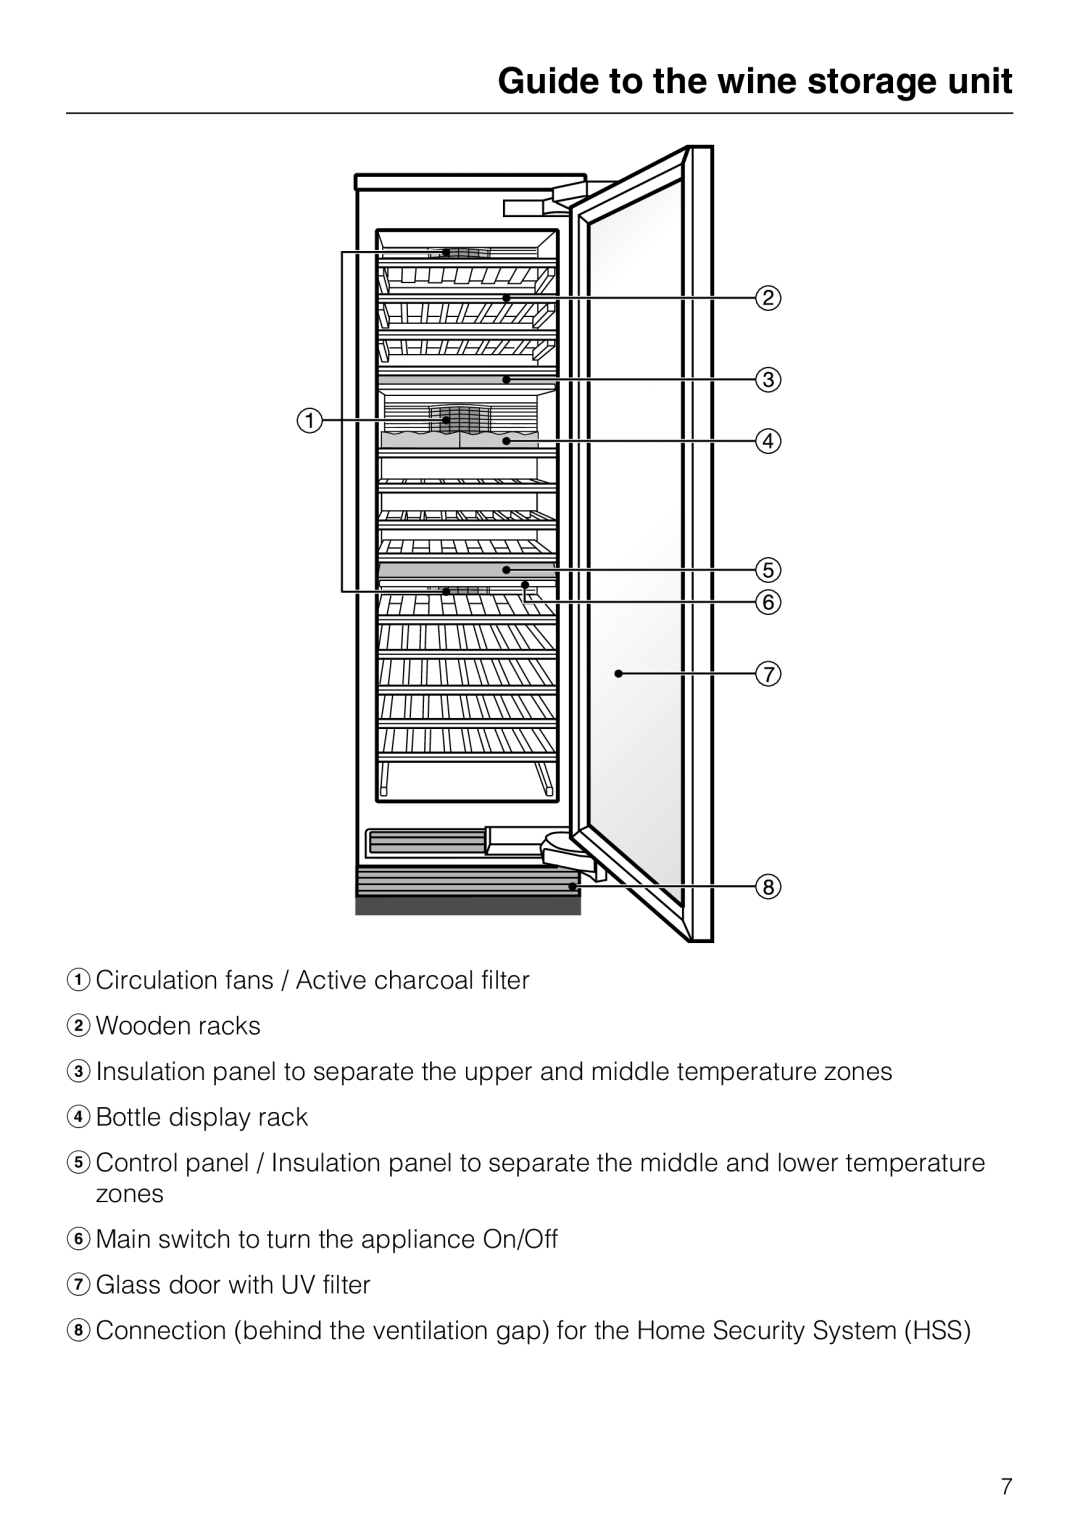 Miele KWT1601SF, KWT1611SF Guide to the wine storage unit, aCirculation fans / Active charcoal filter, bWooden racks 